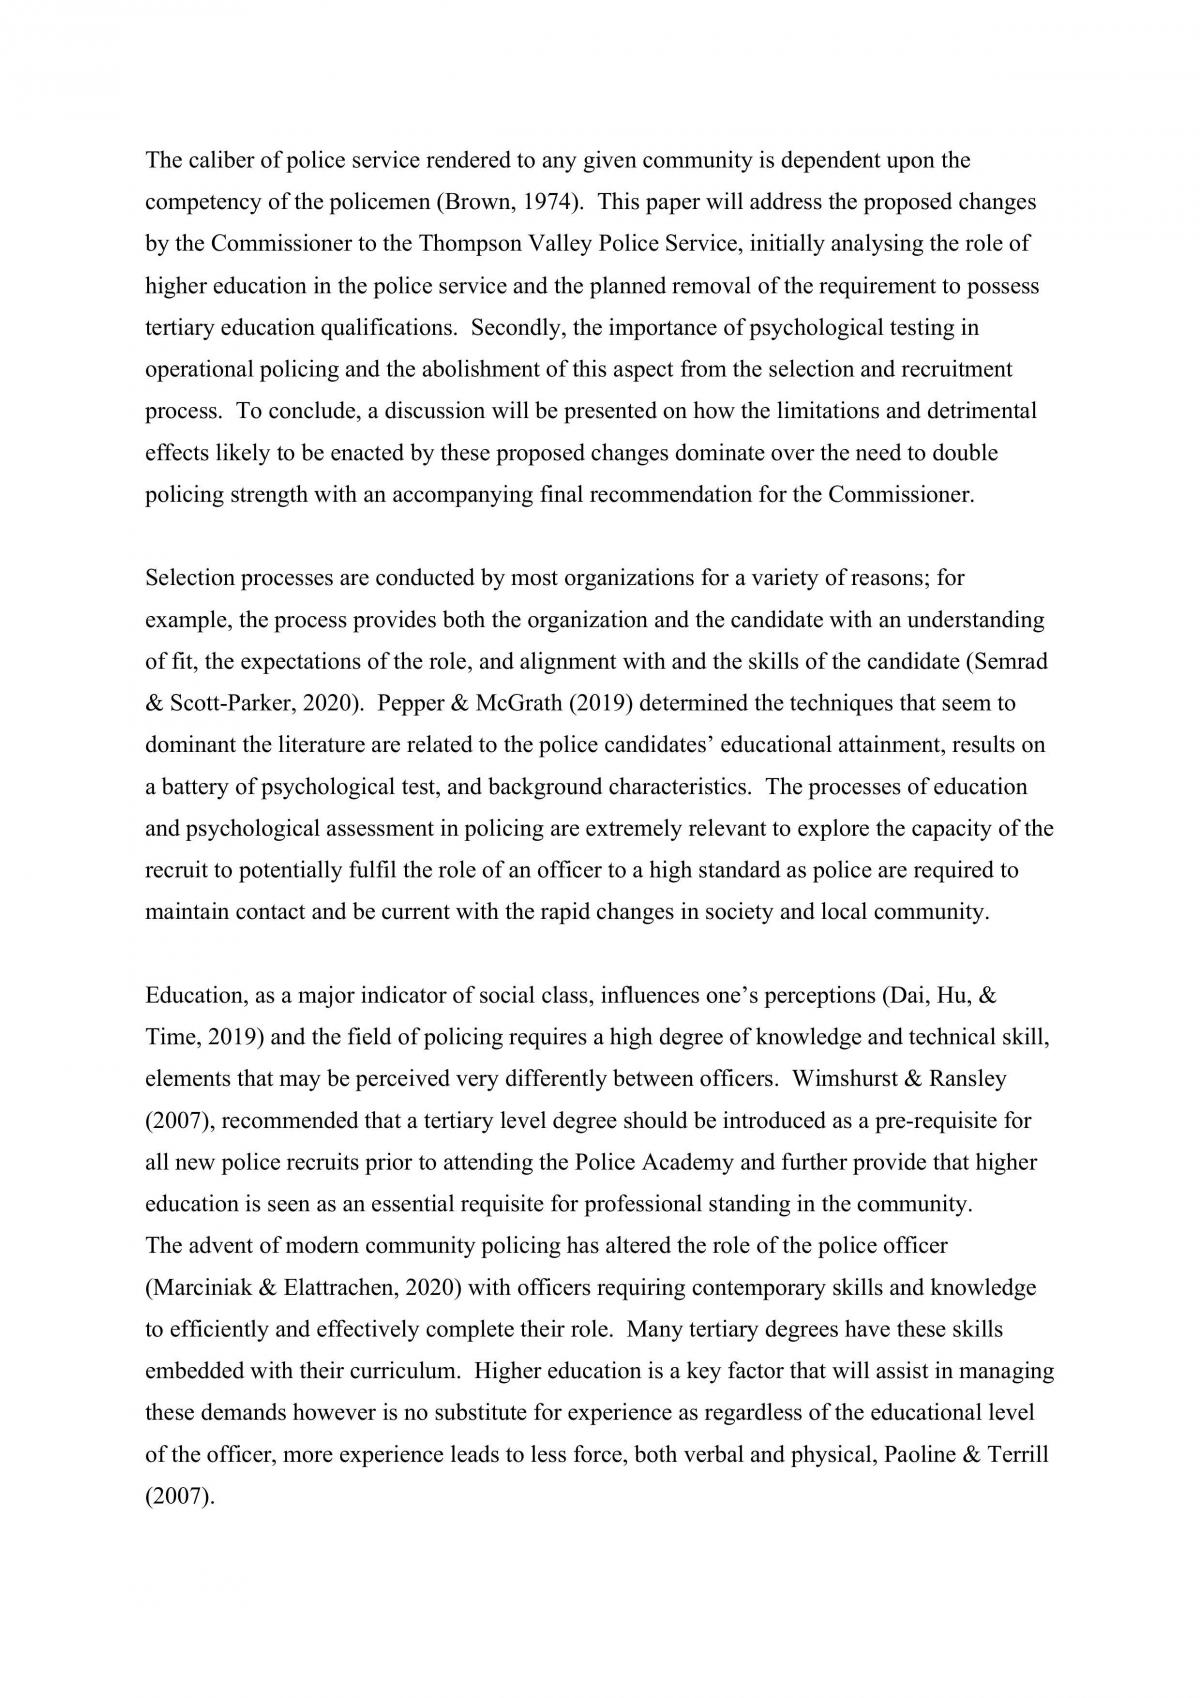 Assessment 1 - Analysis of Police Selection Process - Page 2